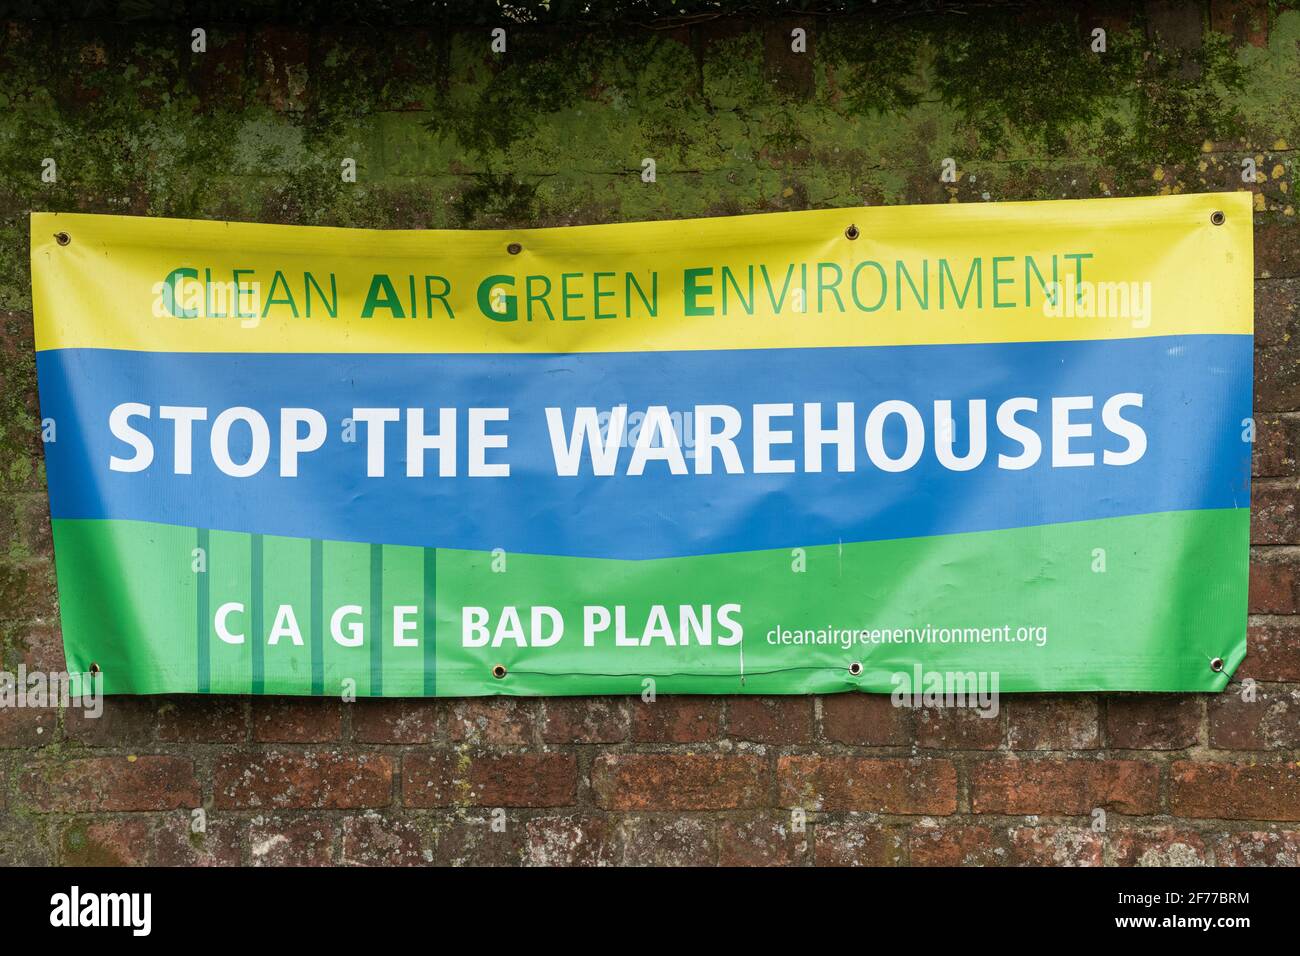 Stop the Warehouses protest banner, Clean Air Green Environment, objecting to plans to build large Amazon warehouses near Dummer, Hampshire, UK, 2021 Stock Photo